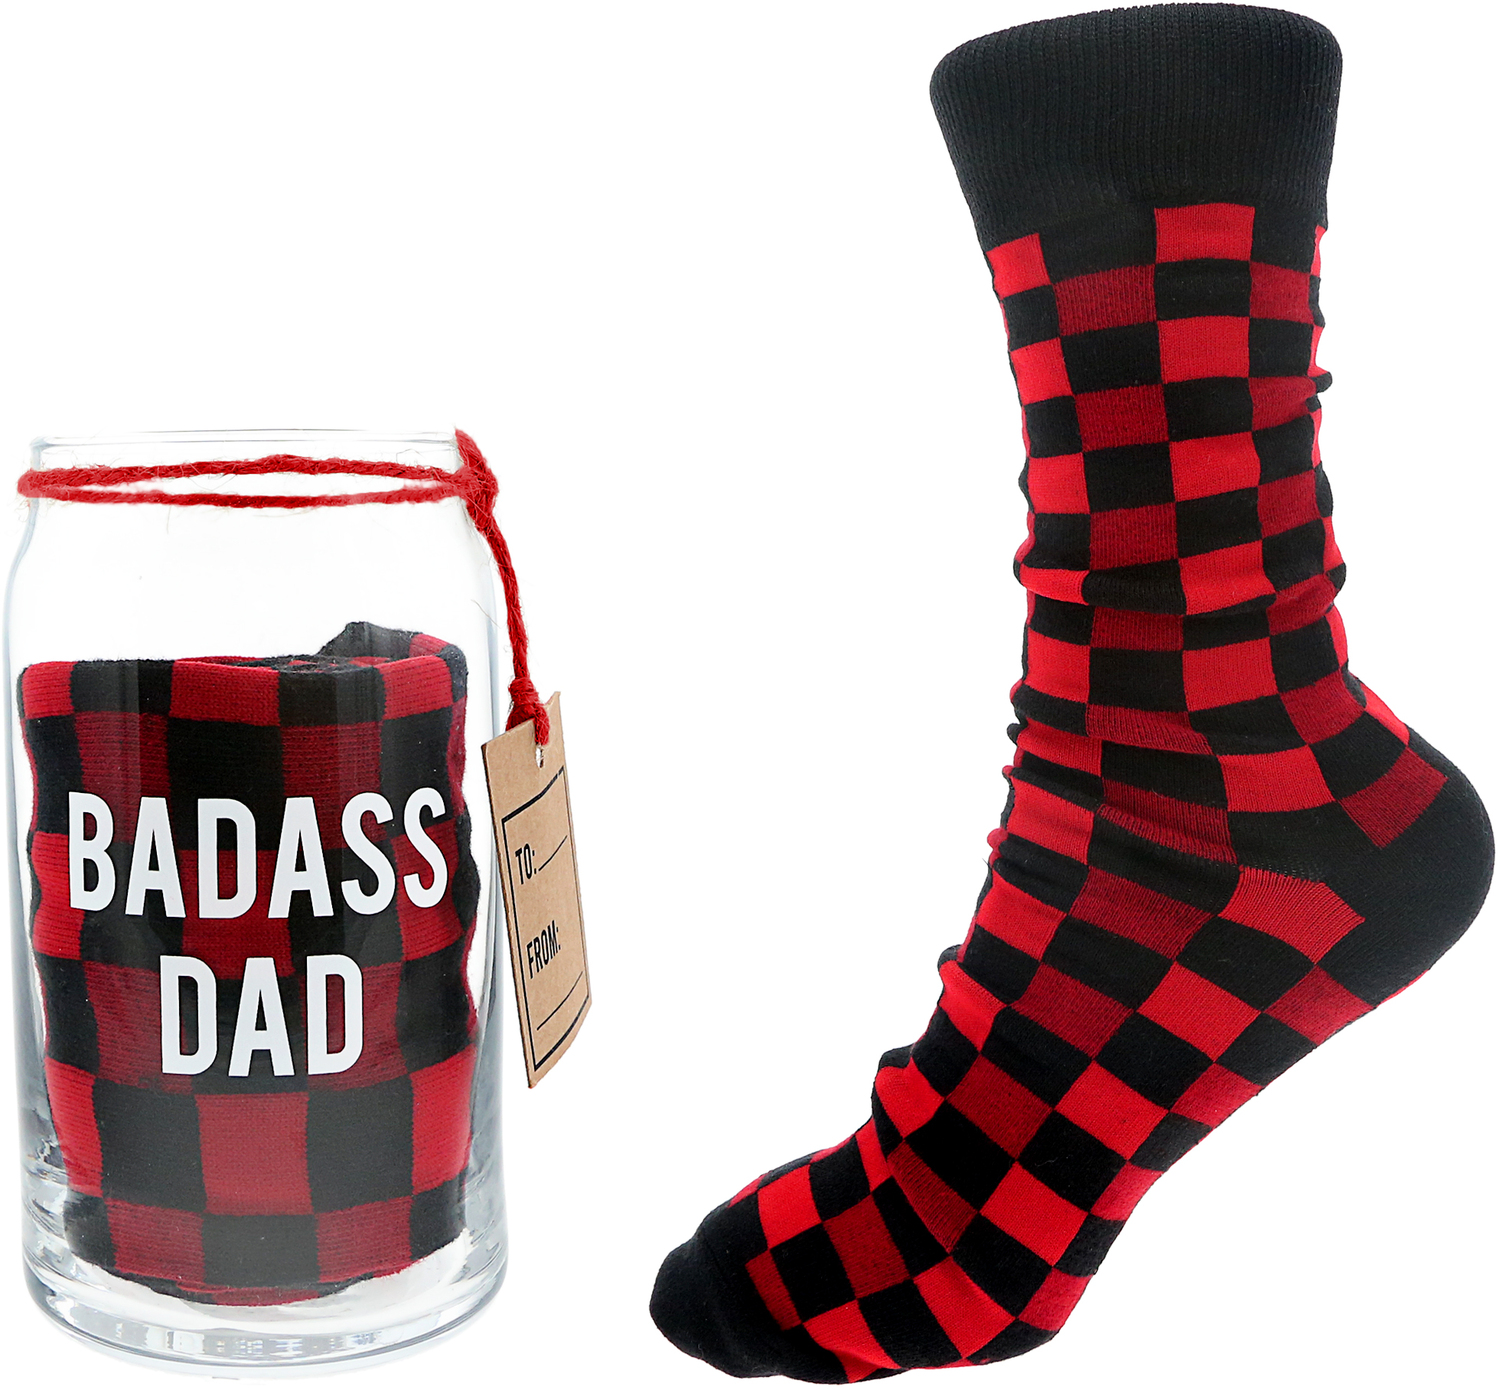 Badass Dad by Man Made - Badass Dad - 16 oz Beer Can Glass and Sock Set